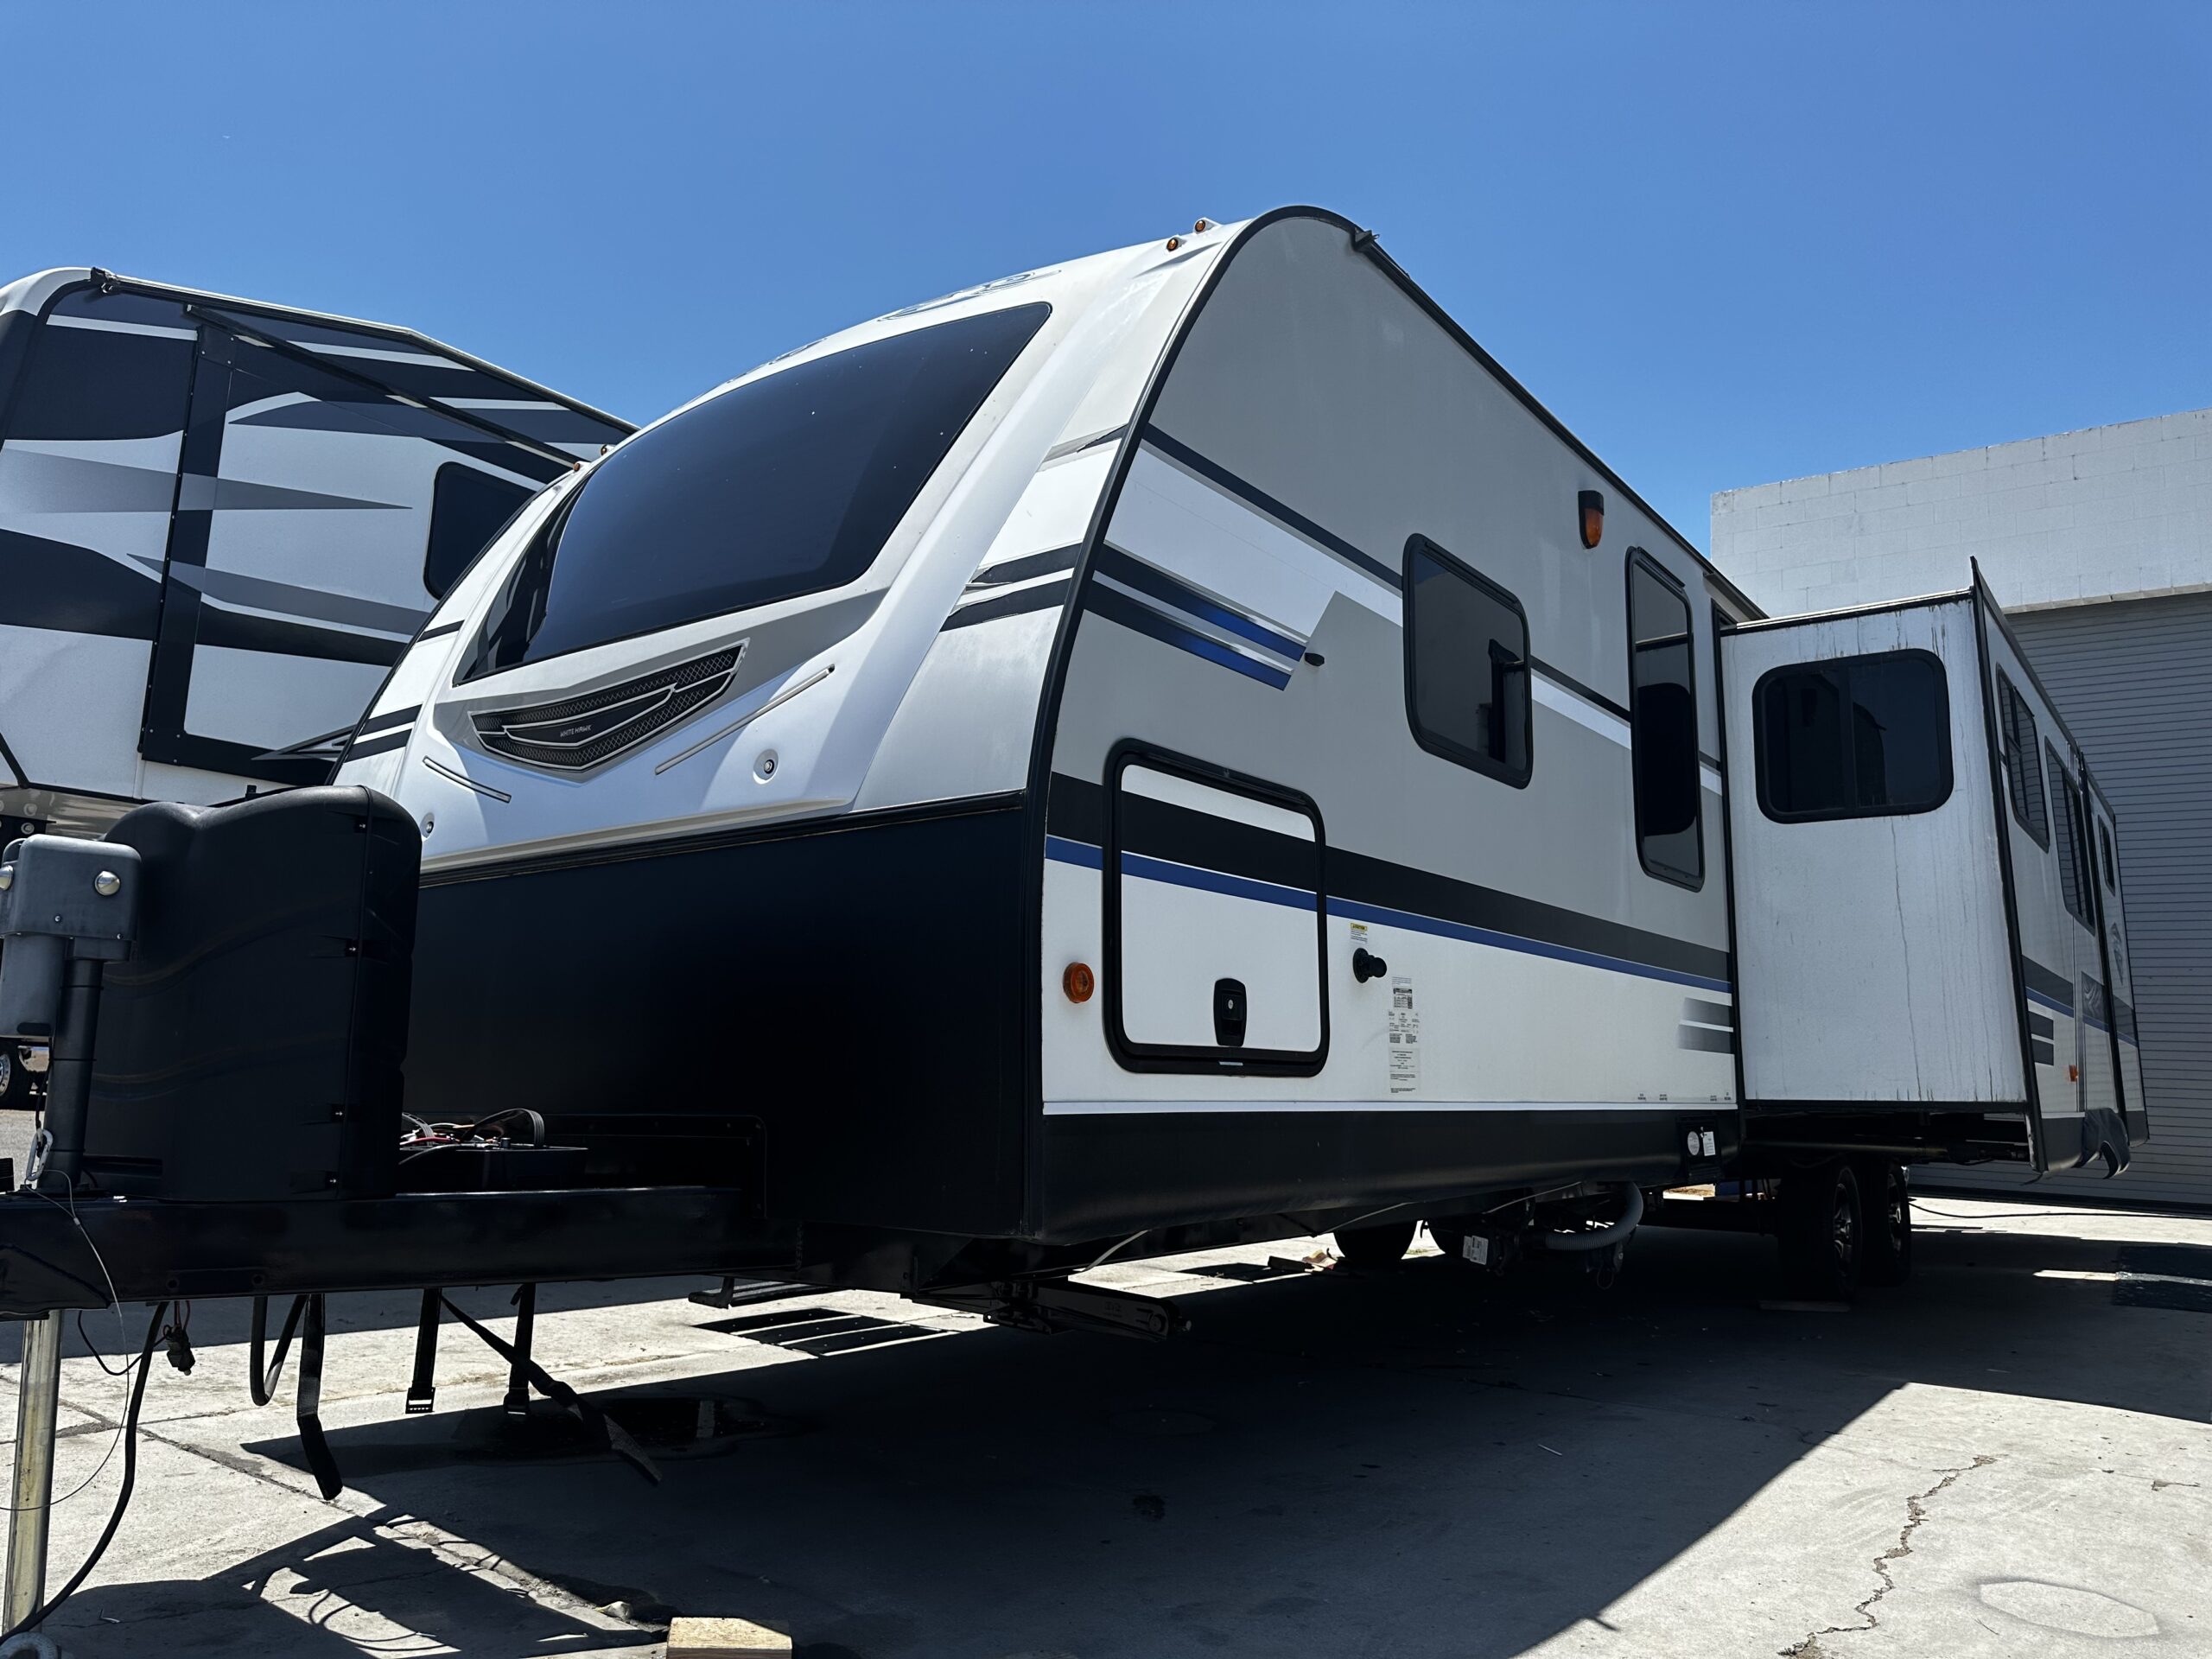 SOLD* 2018 Jayco Whitehawk 31BH – BUNKHOUSE – 2 Slide Outs – Sleeps 10 – $29,950